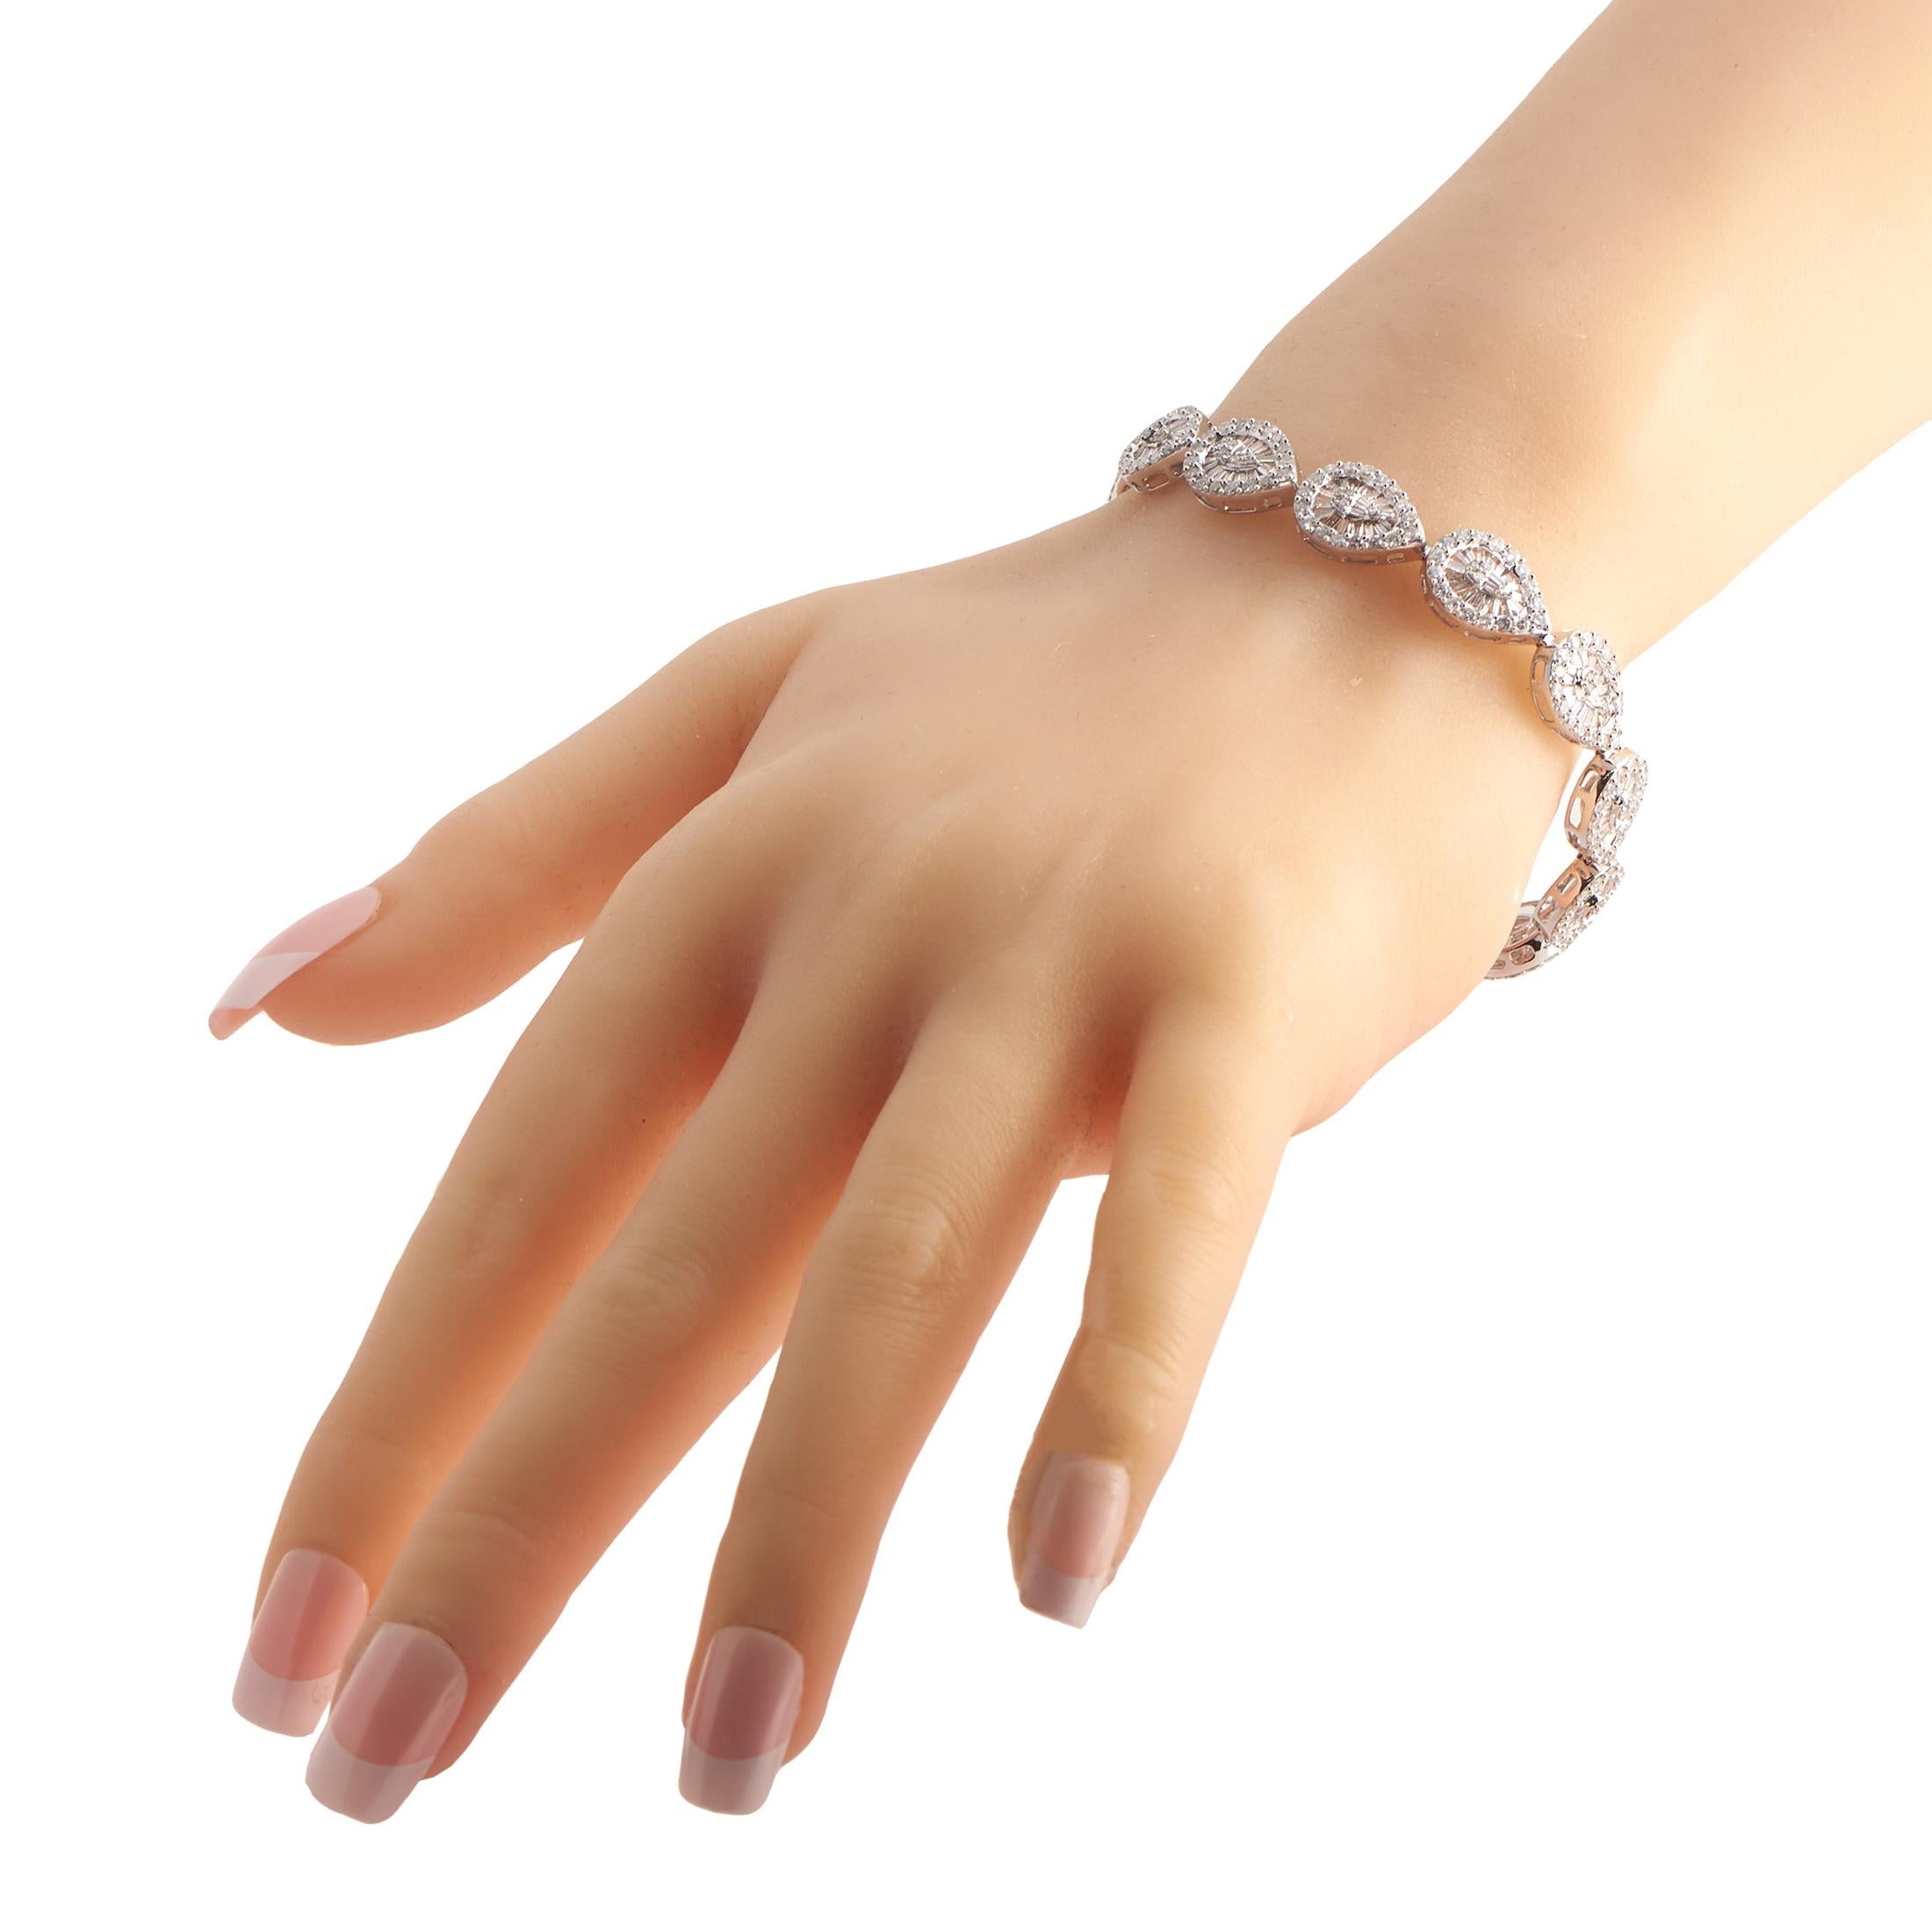 A series of pear-shaped 14K white gold links give this luxury bracelet its signature design. Stylish and incredibly sophisticated, this piece measures 7.25 long and includes sparkling diamonds with a total weight of 6.05 carats.This jewelry piece is